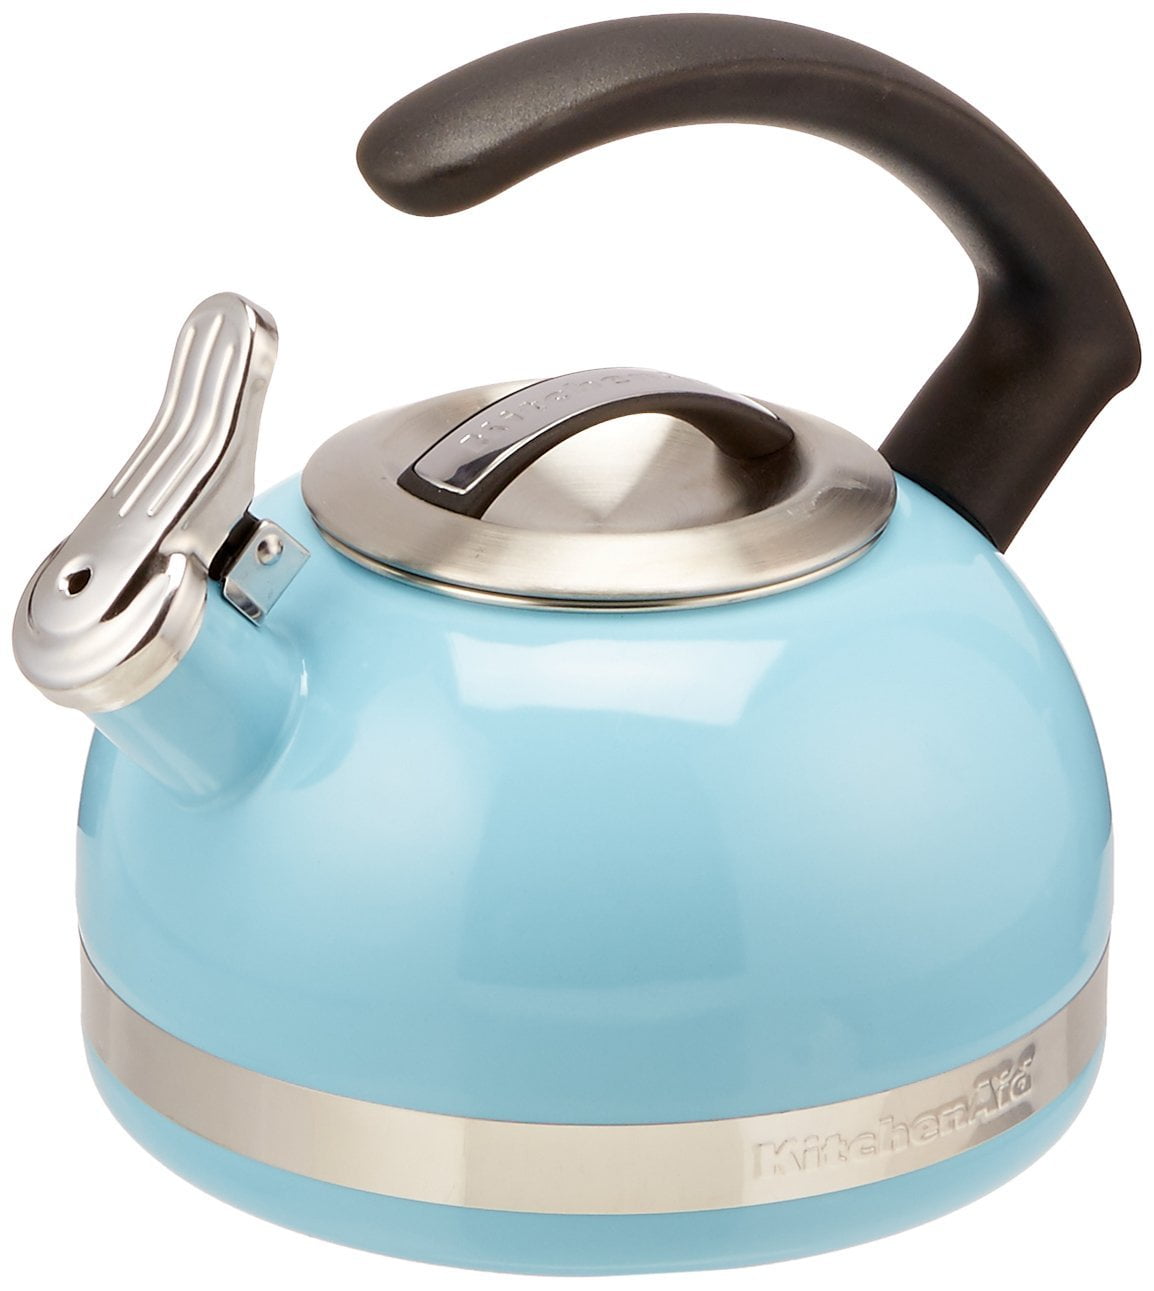 KITCHENAID® GLASS TEA KETTLE OFFERS TEA LOVERS EASY MASTERY OF THE PERFECT  CUP